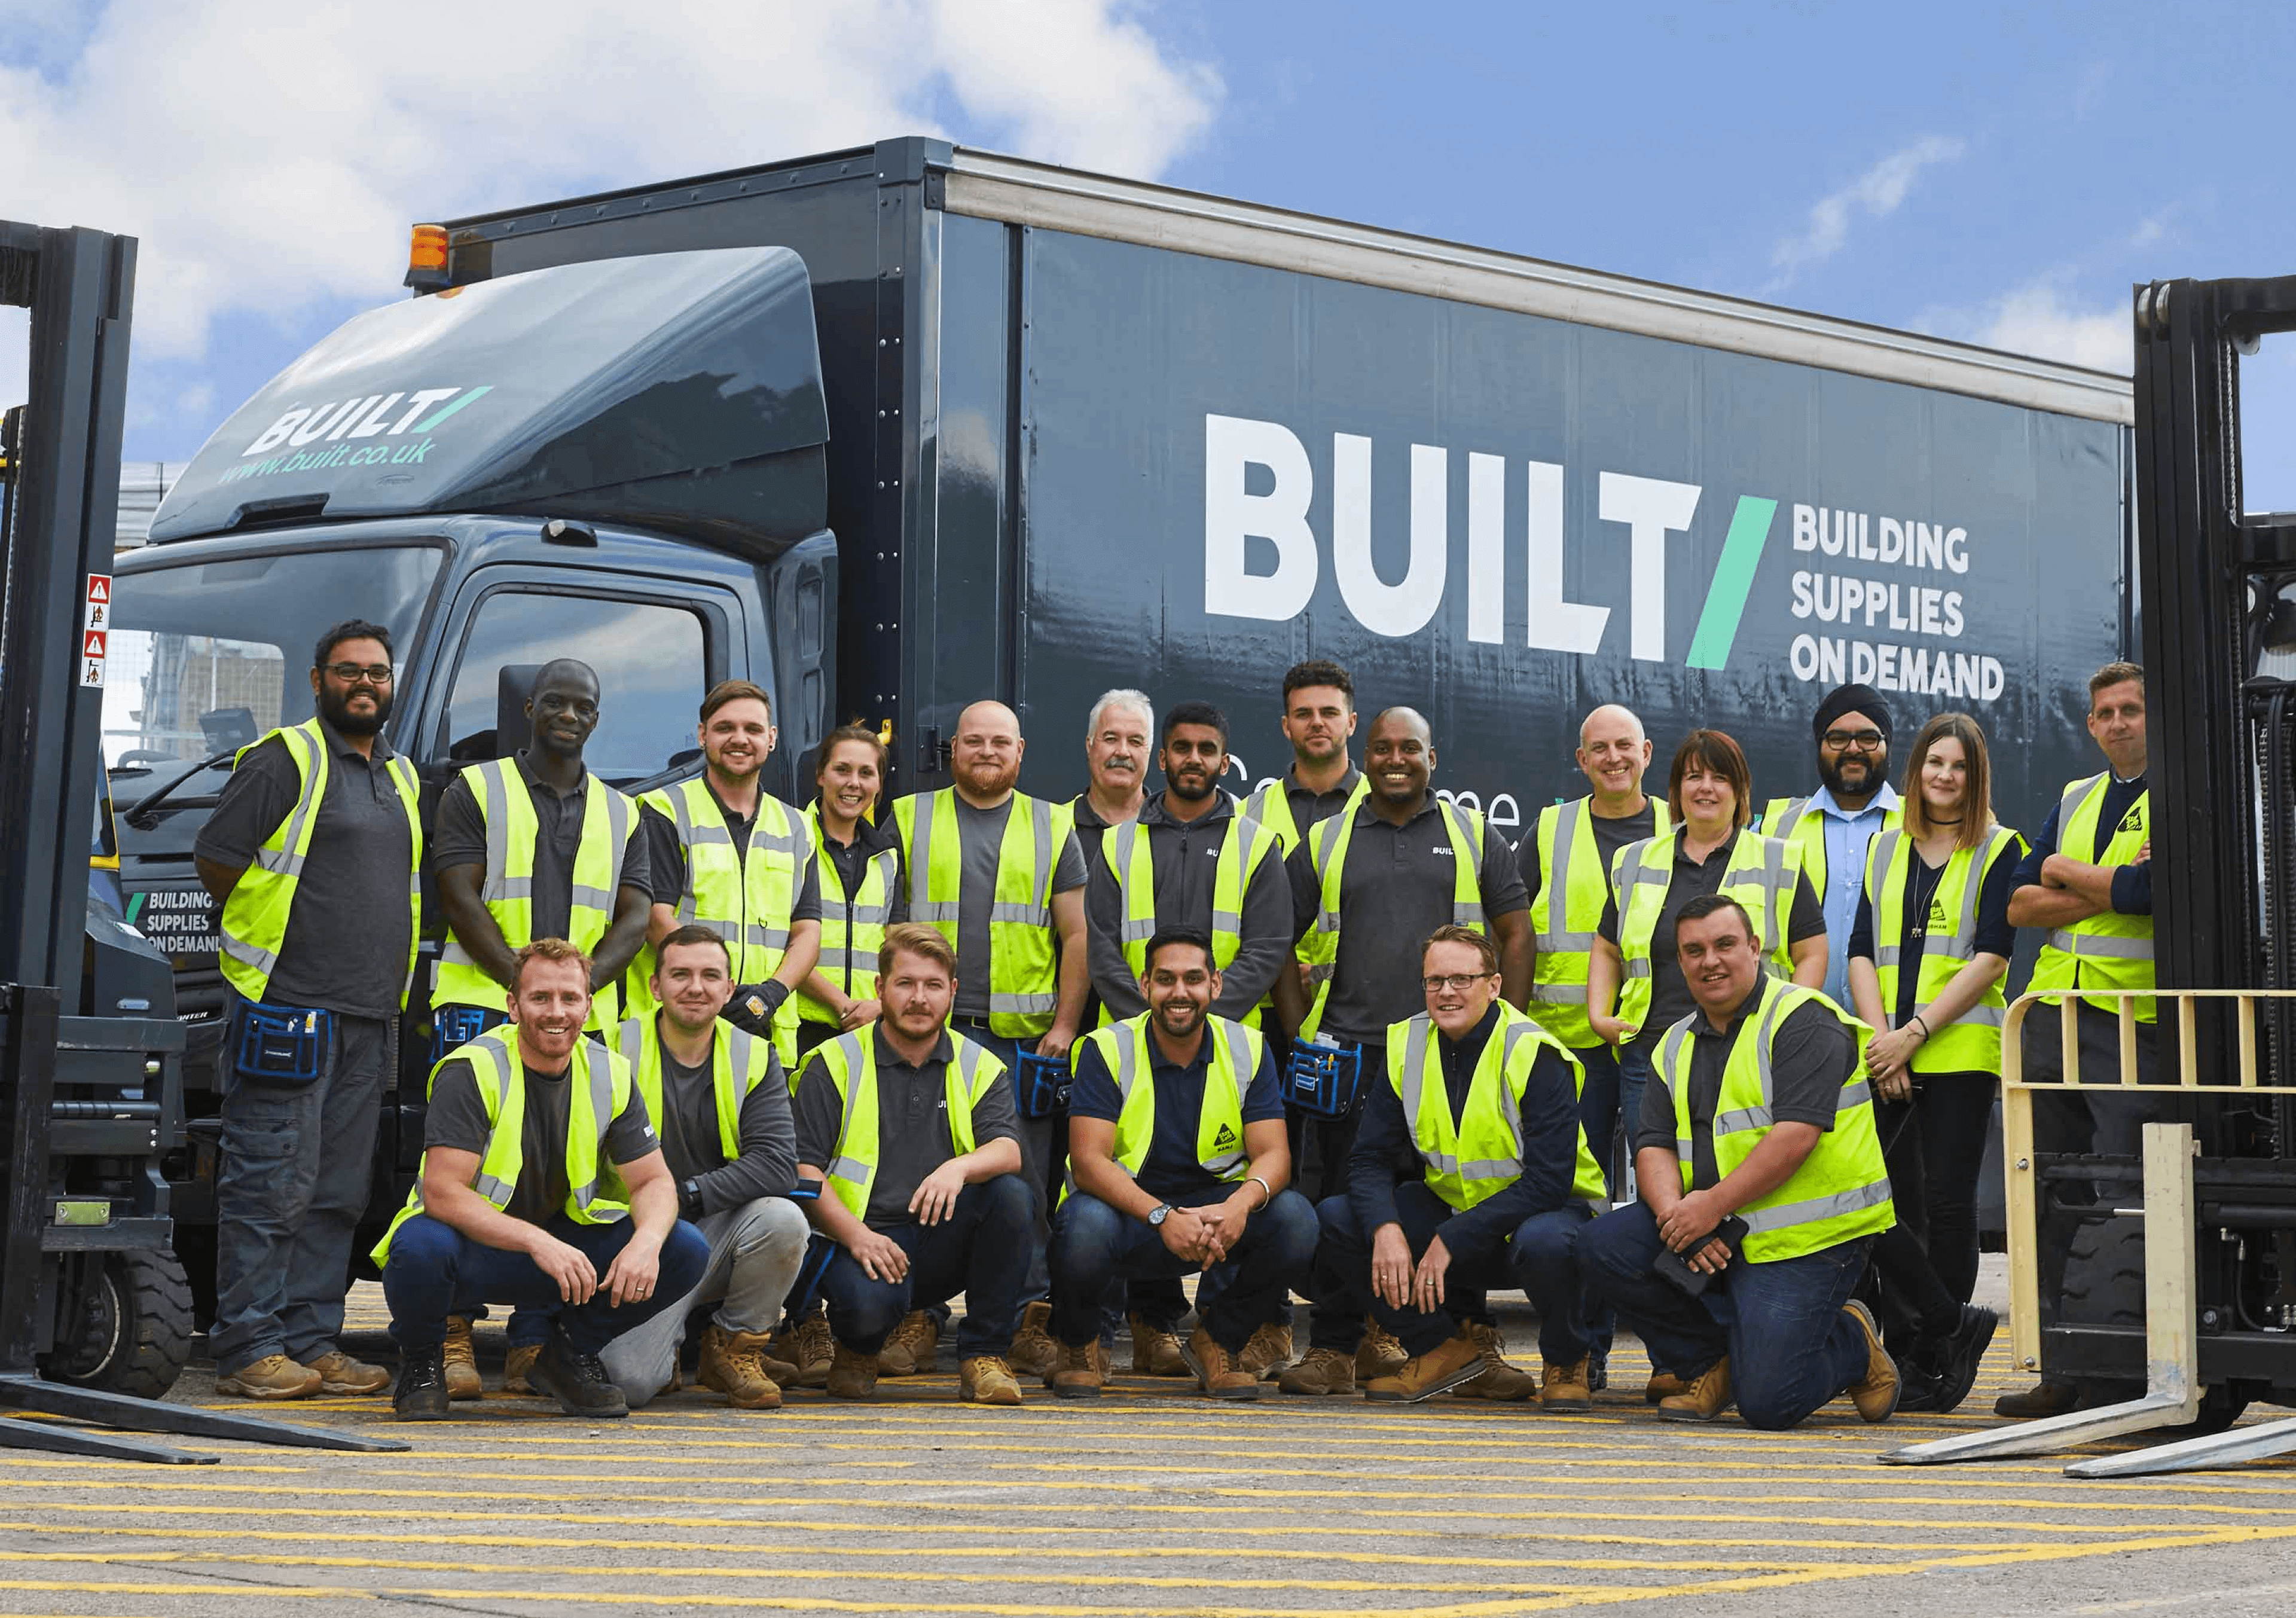 A Built builders merchant team of 20 employees group-shot in-front of a branded truck in an outdoor warehouse